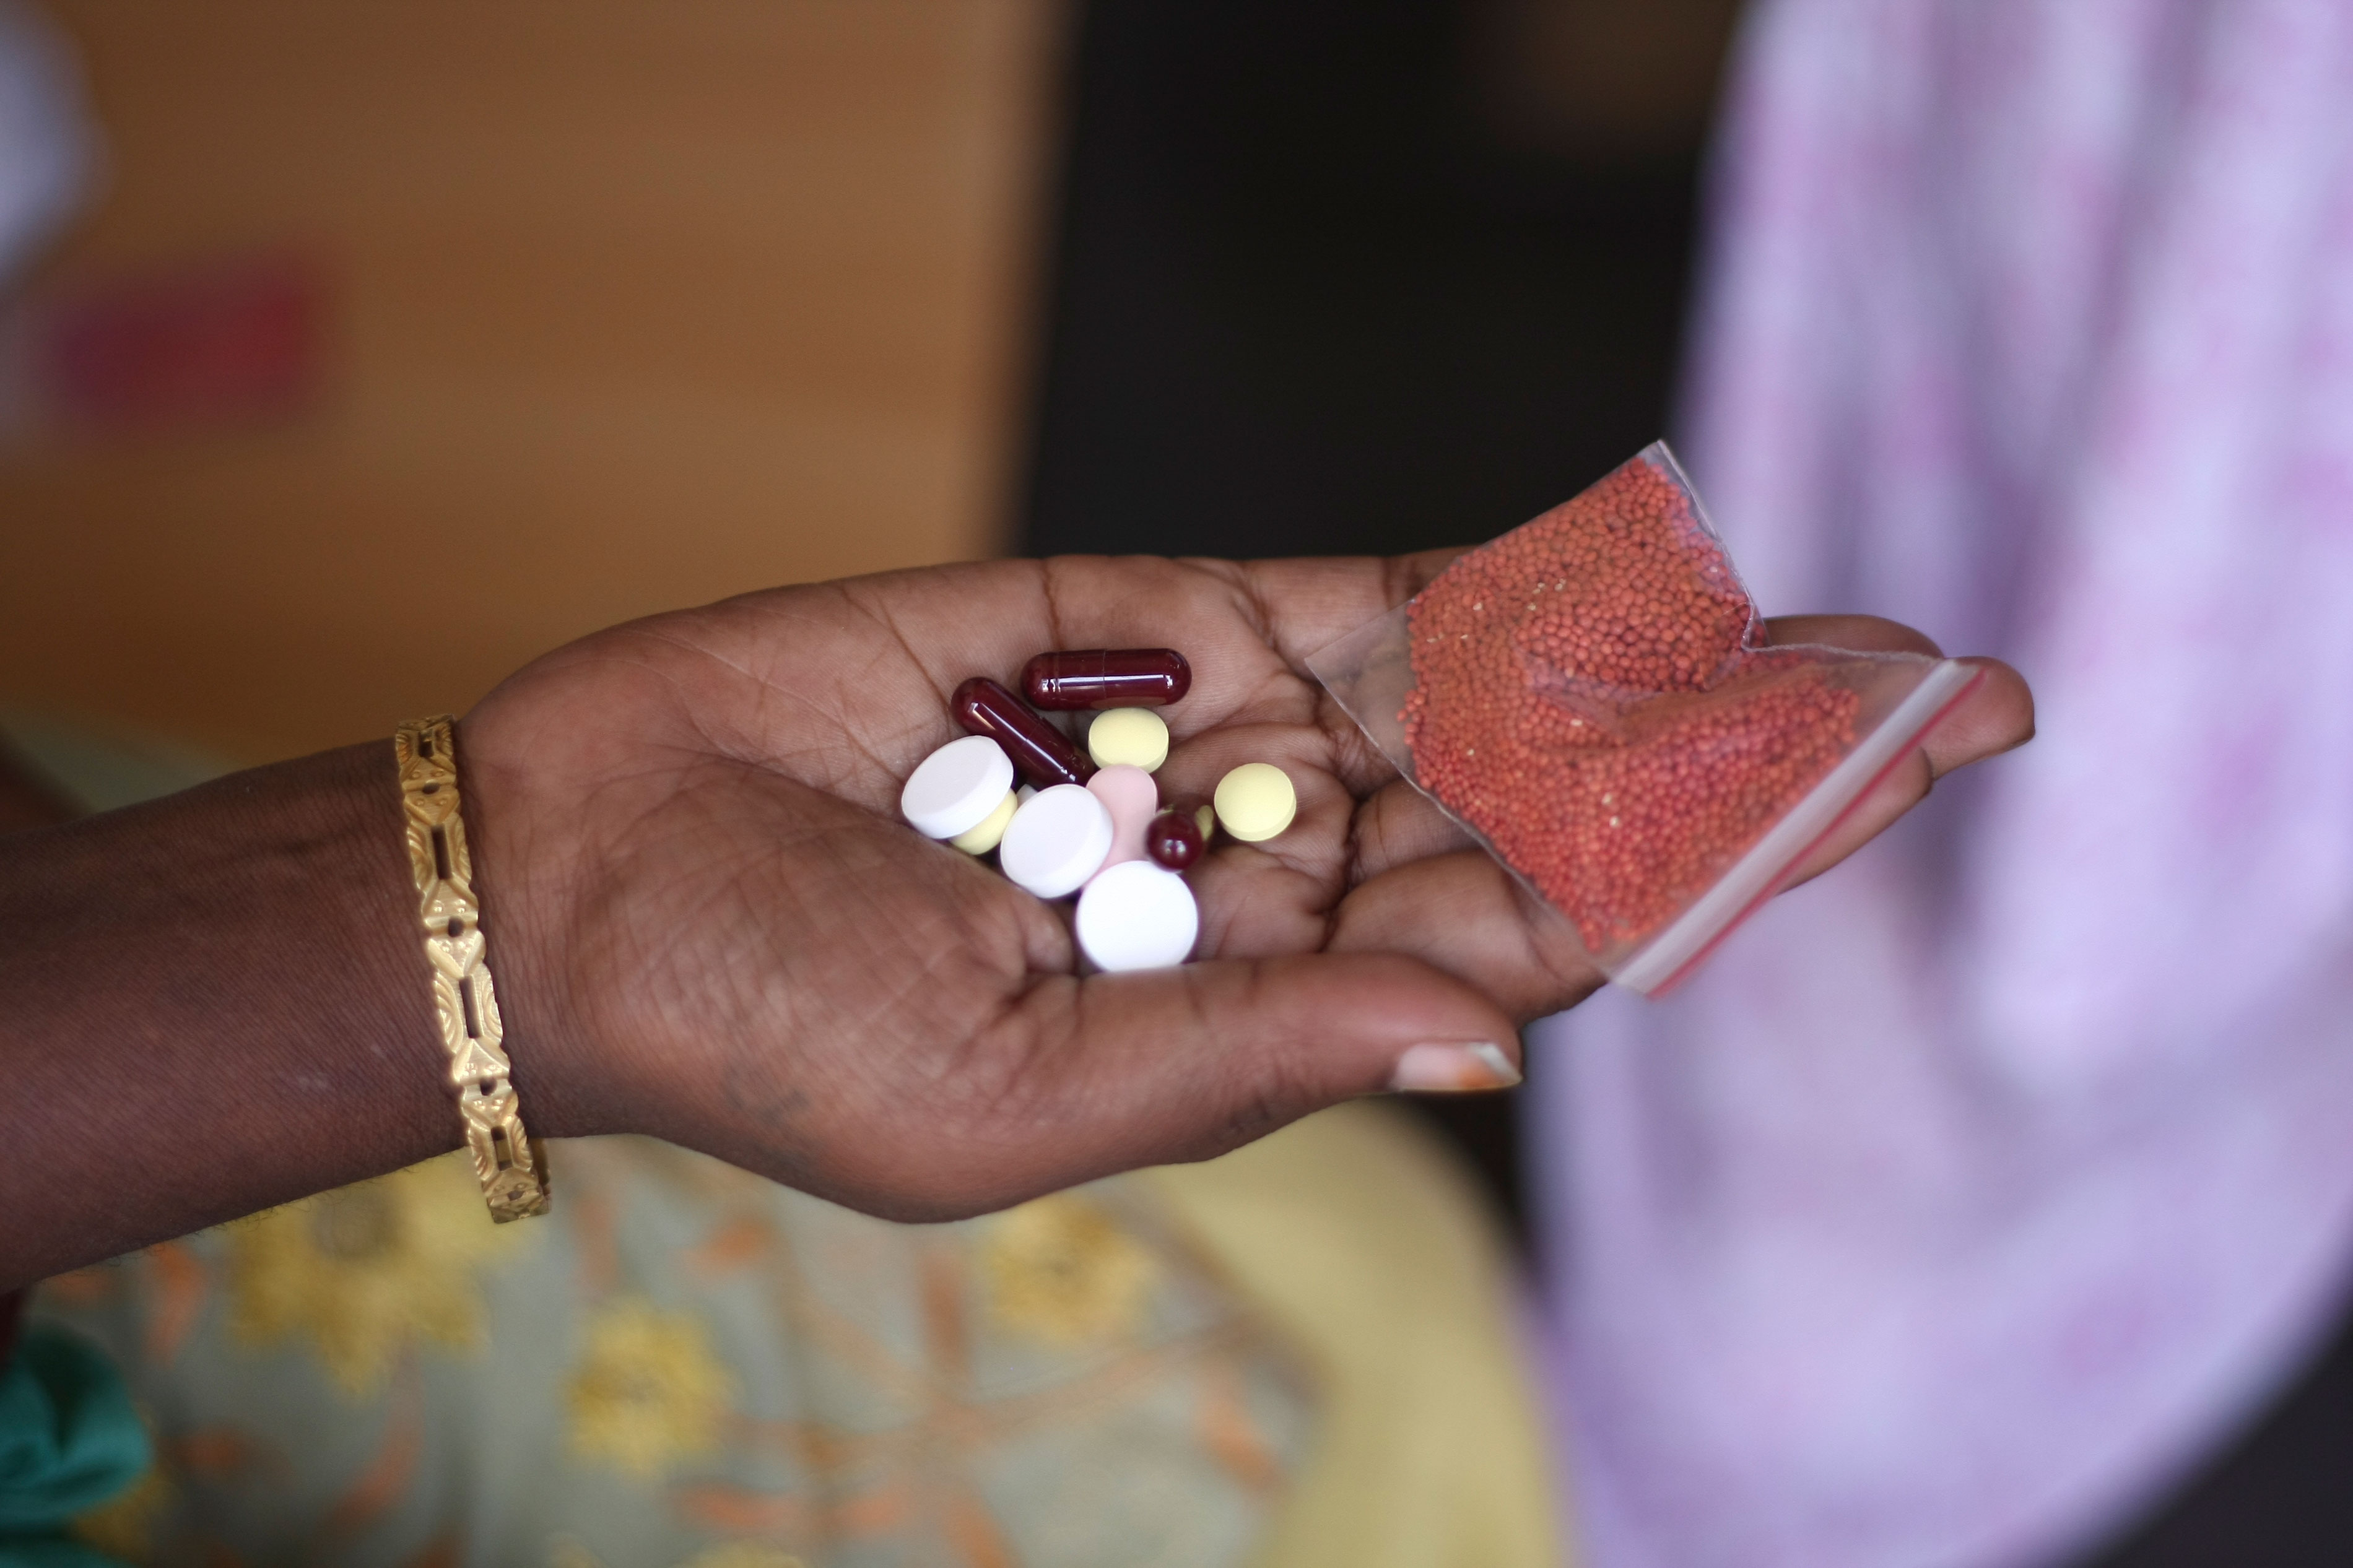 Shanti (name changed) is a 38 year old semi-literate woman living in Mumbai. She has been living with HIV and multidrug resistant tuberculosis (MDR-TB) for the past 5 years. Here, she displays her daily dosis of medication. Photograph by Bithin Das